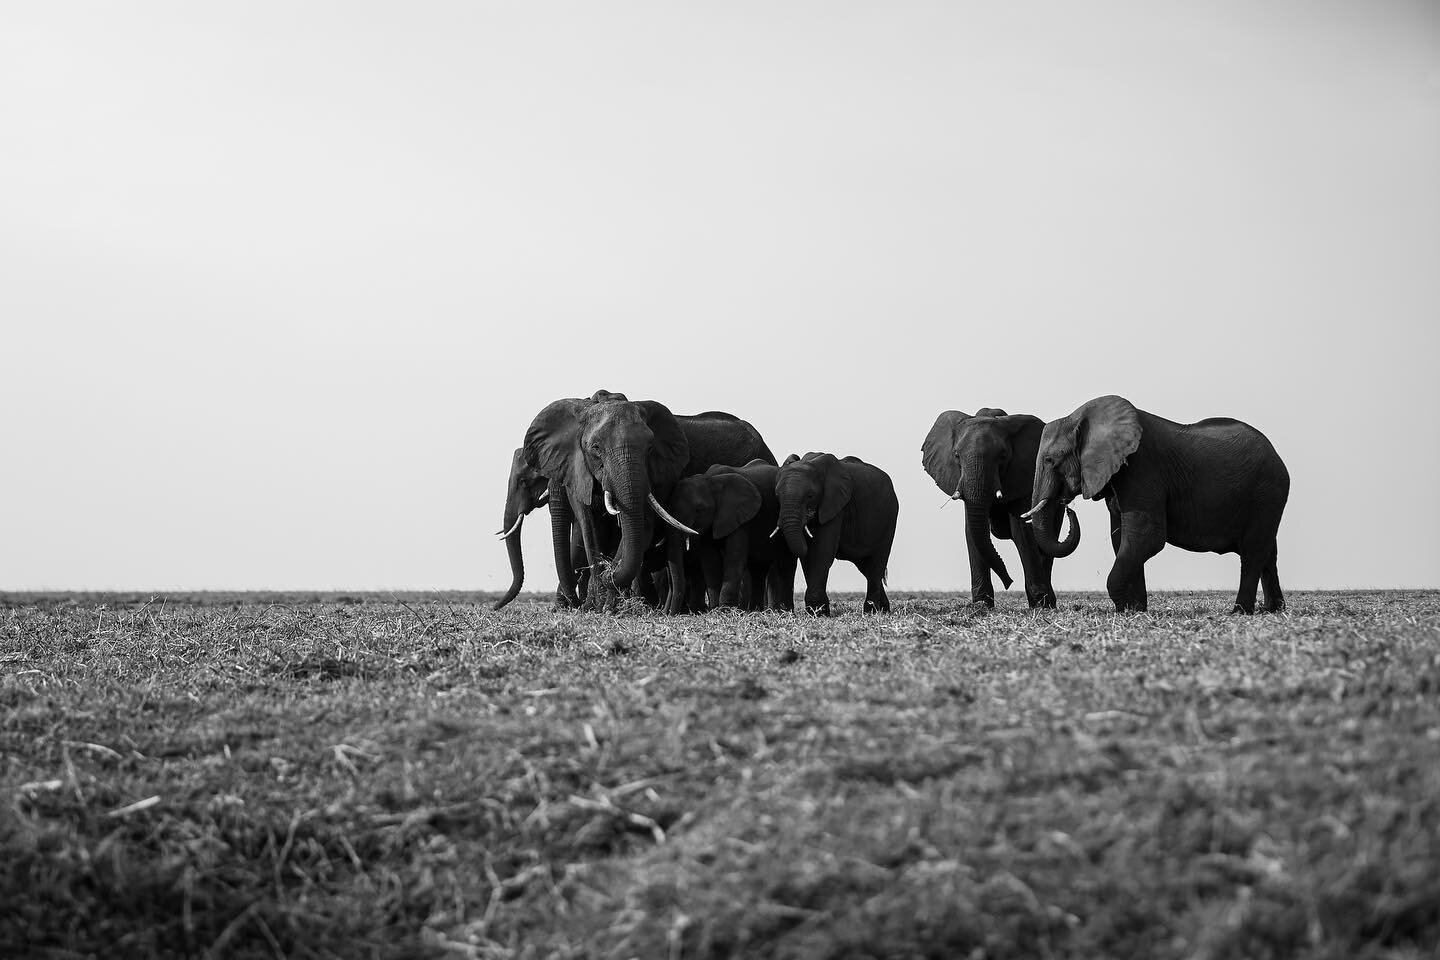 The elephants of Chobe National Park are a magestic sight to behold in the late afternoon sun. These photos were all captured during a single afternoon boat cruise on the Chobe river with both the Canon R6 and Canon 5D Mark IV paired with the Canon 2